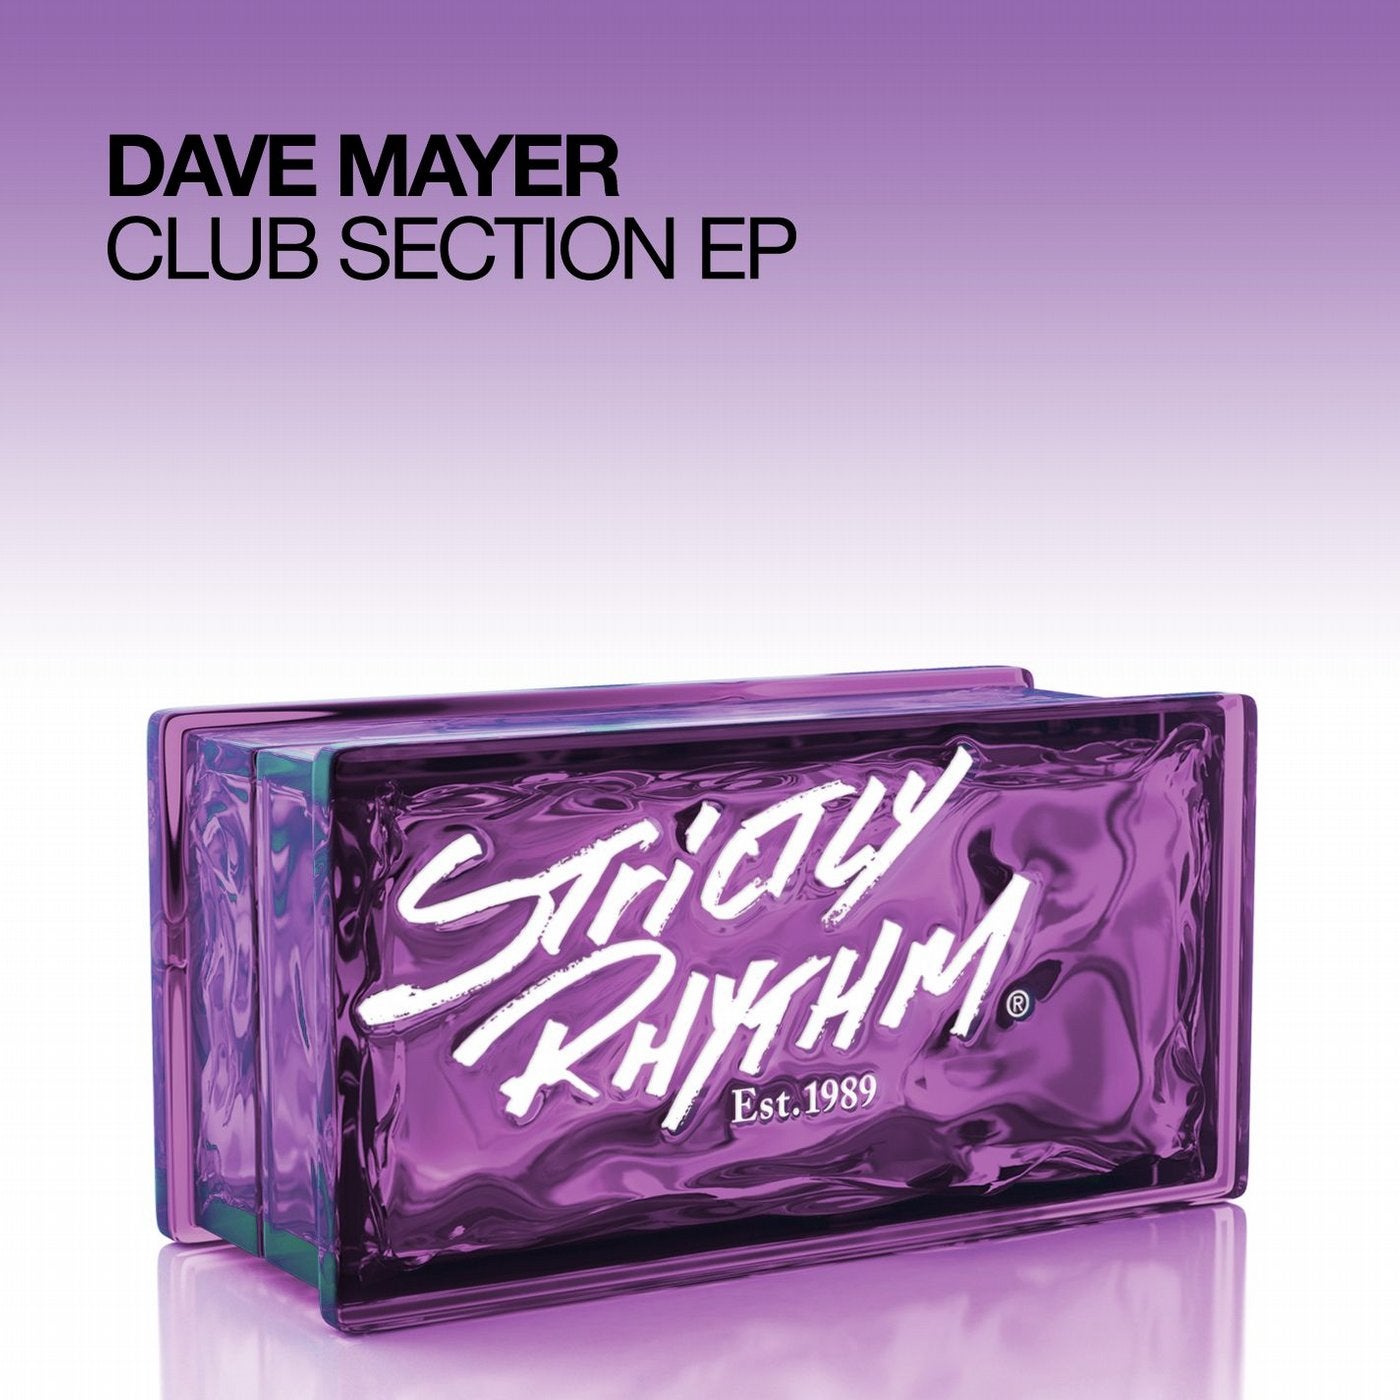 Club Section EP